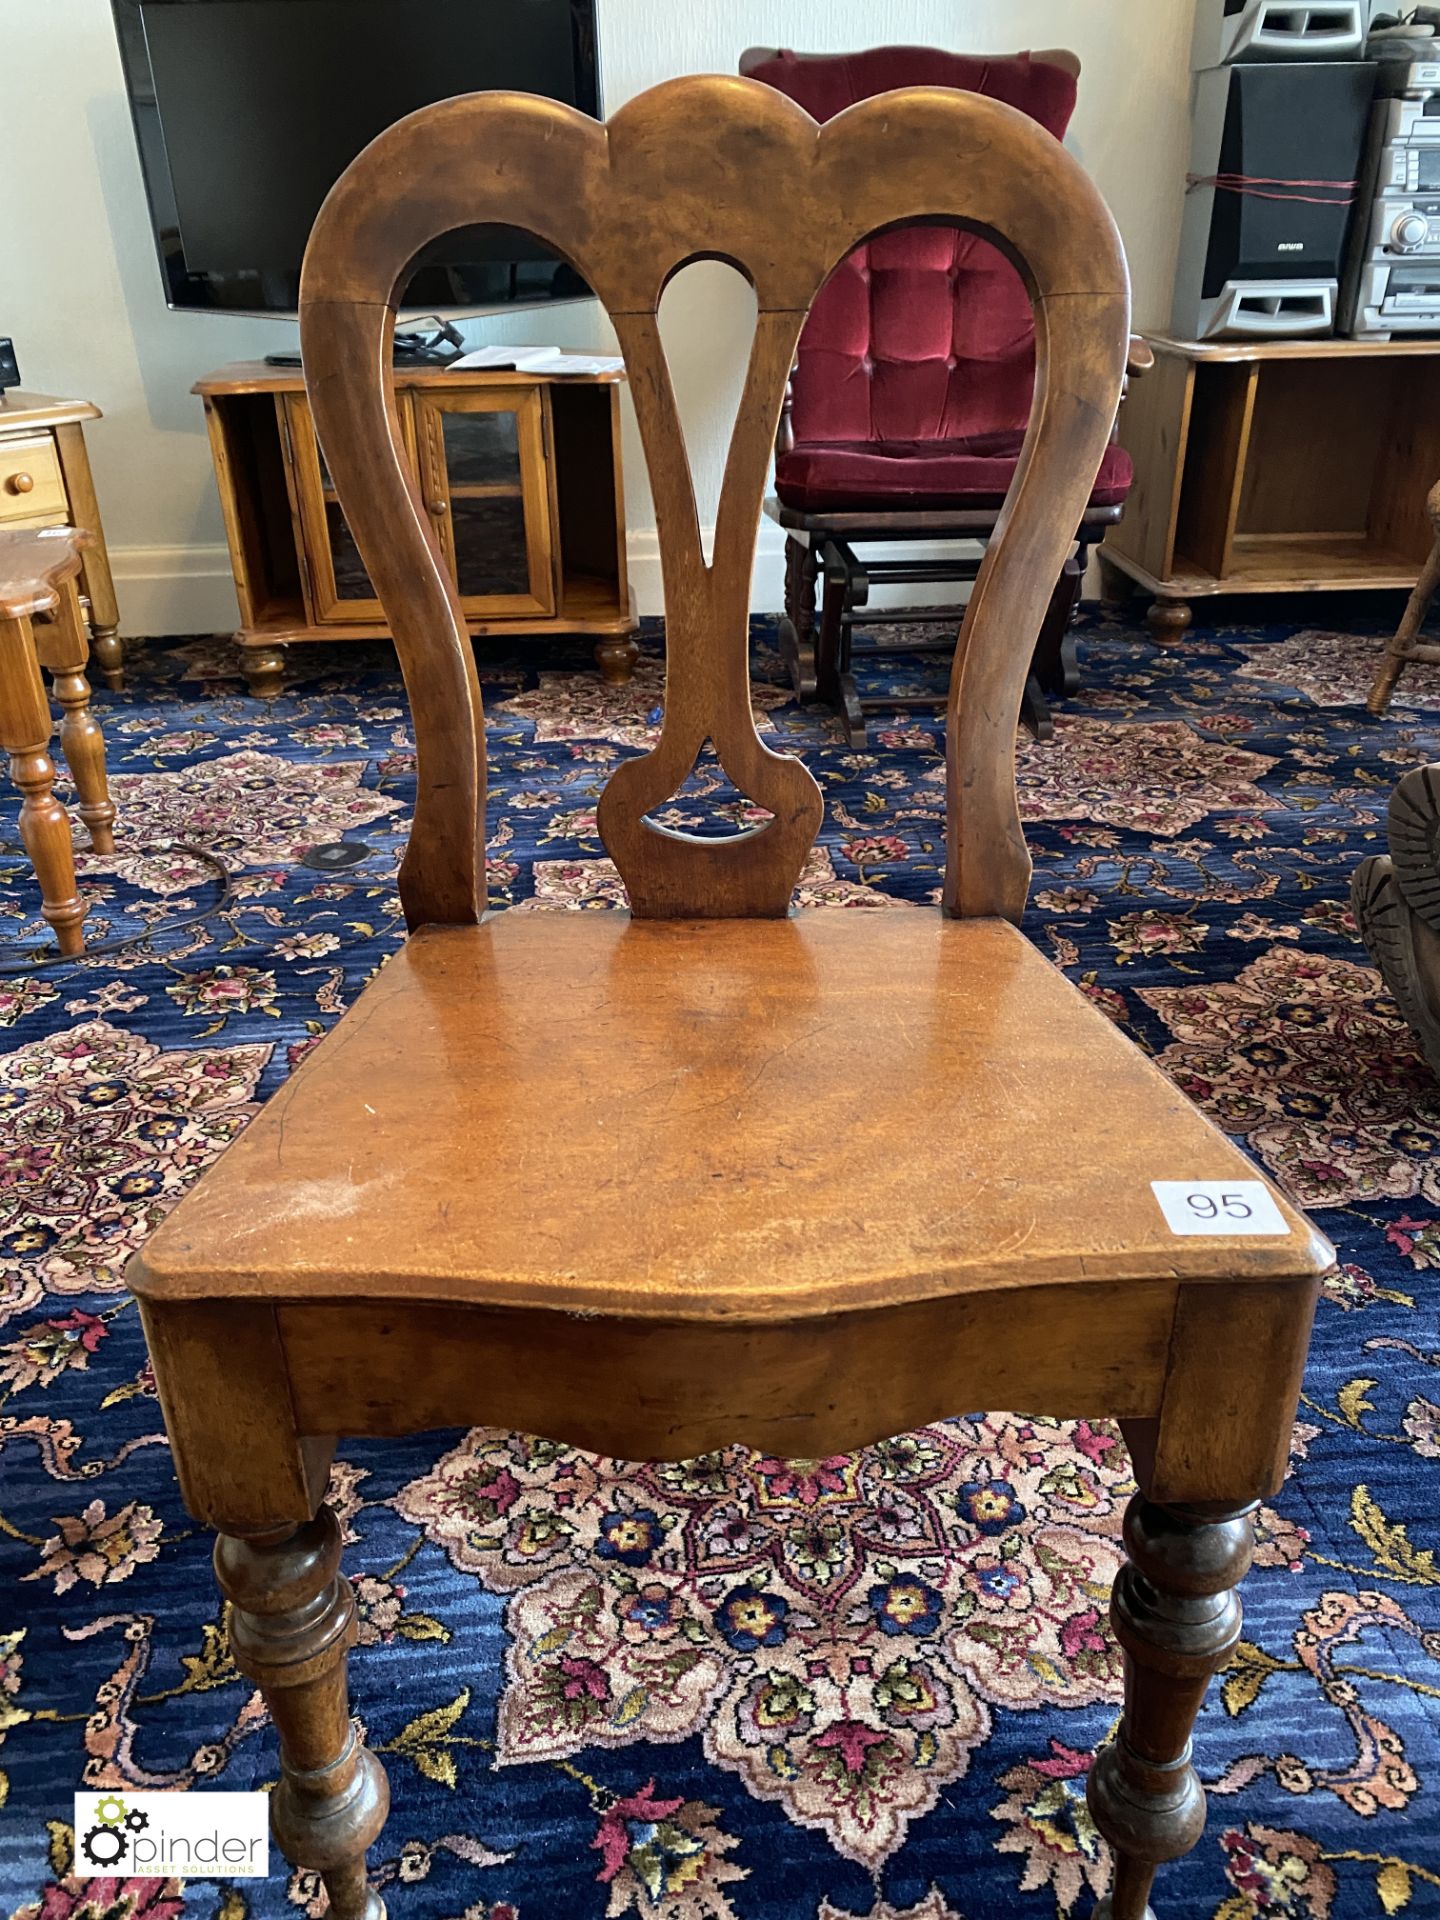 Antique Chair (location: Temple Newsam / collection: Tuesday 8 March between 9.30am and 12noon)